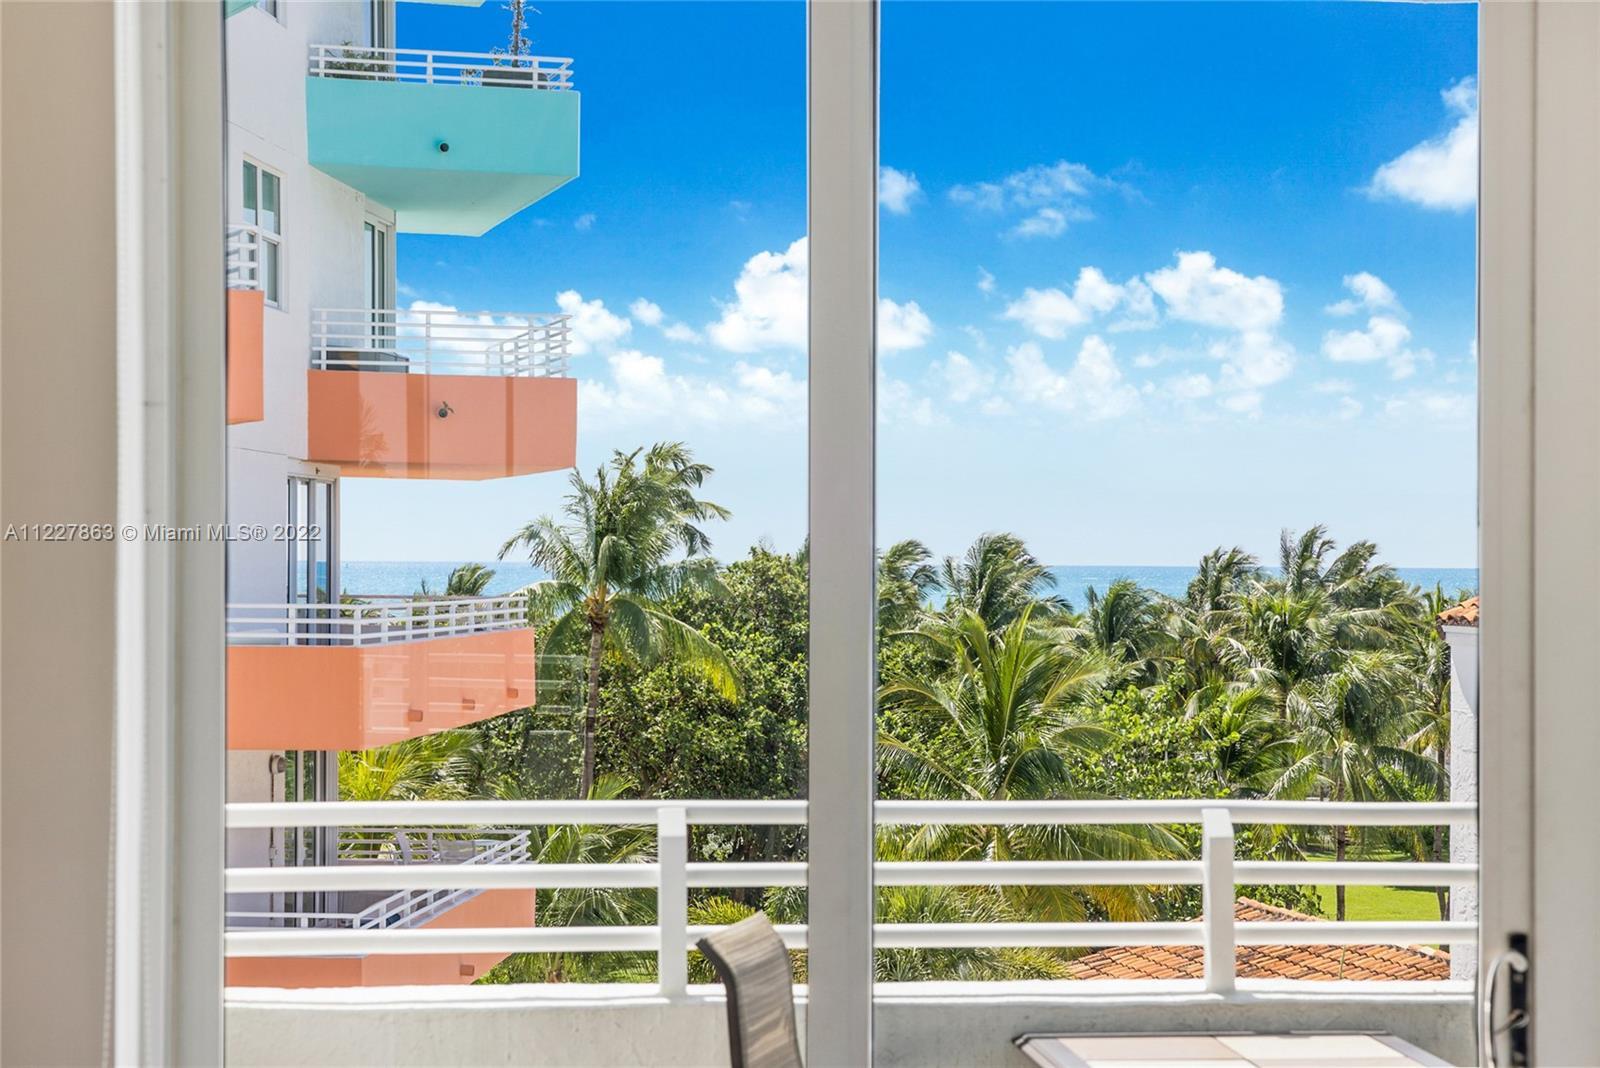 Boutique Building 1Bed 1Bath in highly desirable South of Fifth on Miami Beach. Just steps to the be